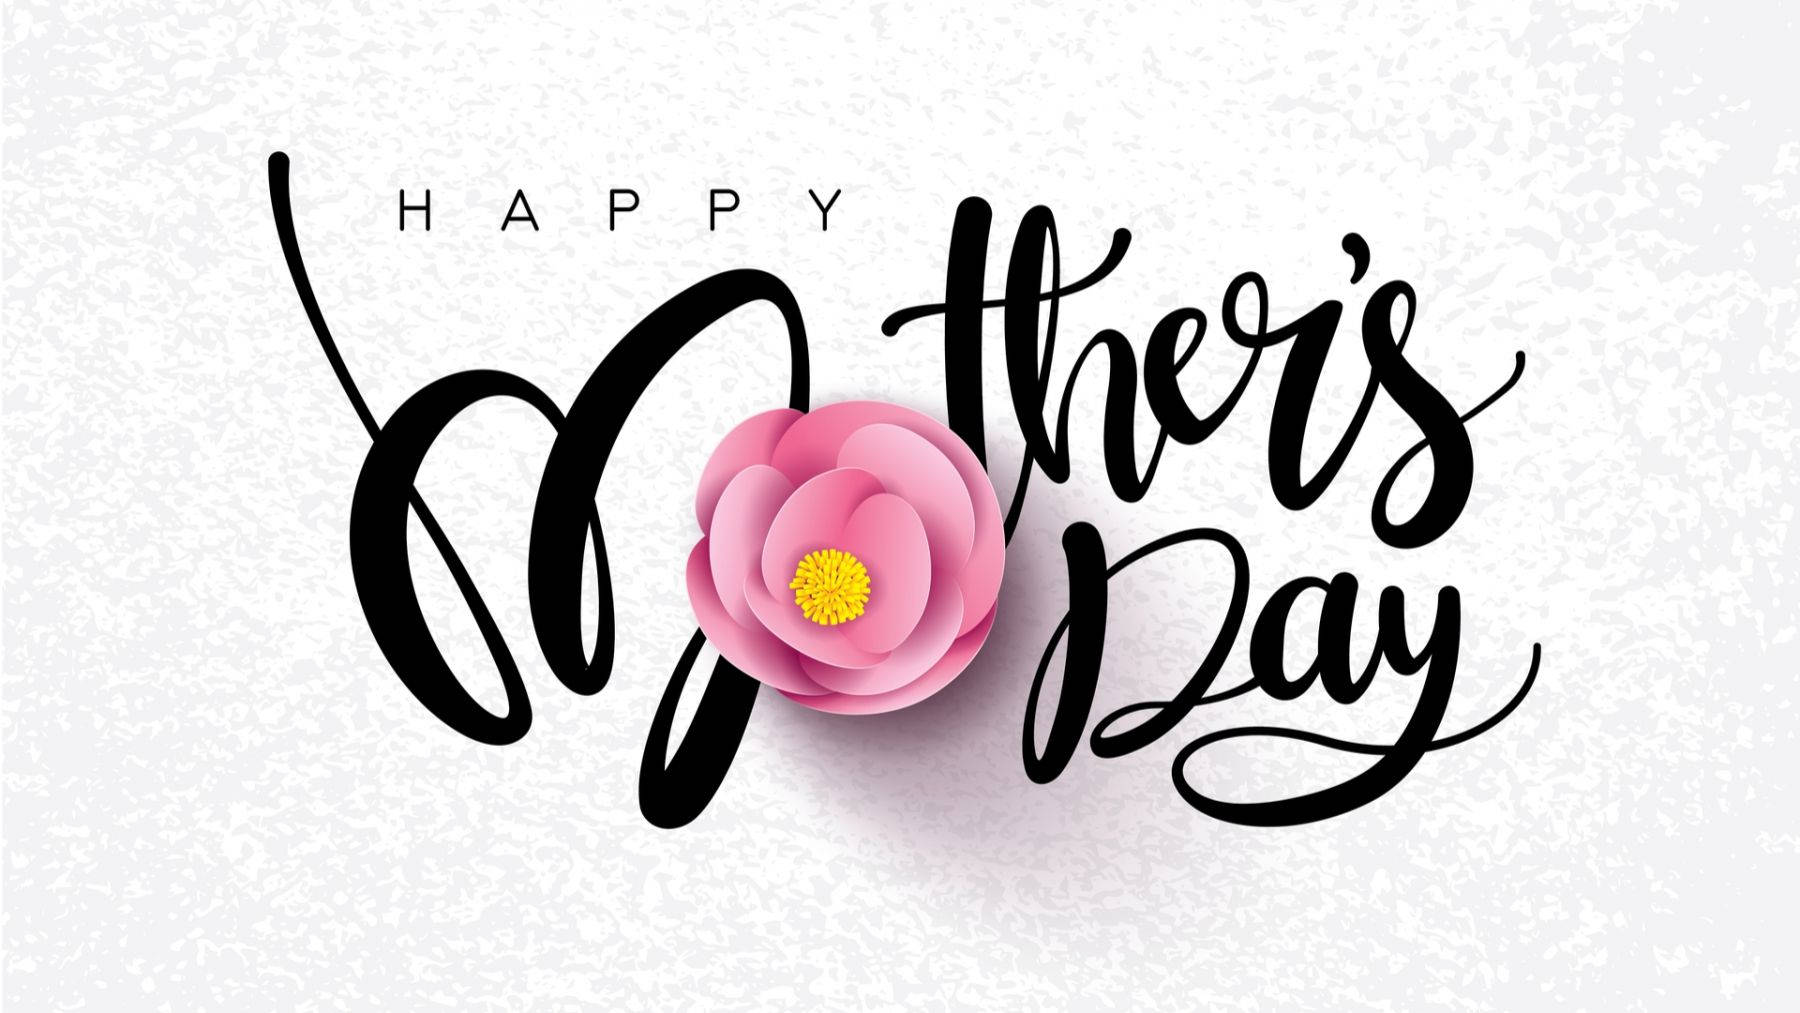 Celebrate Mom This Mothers Day - Wish Her A Happy Mothers Day With This Sparkley Card Background